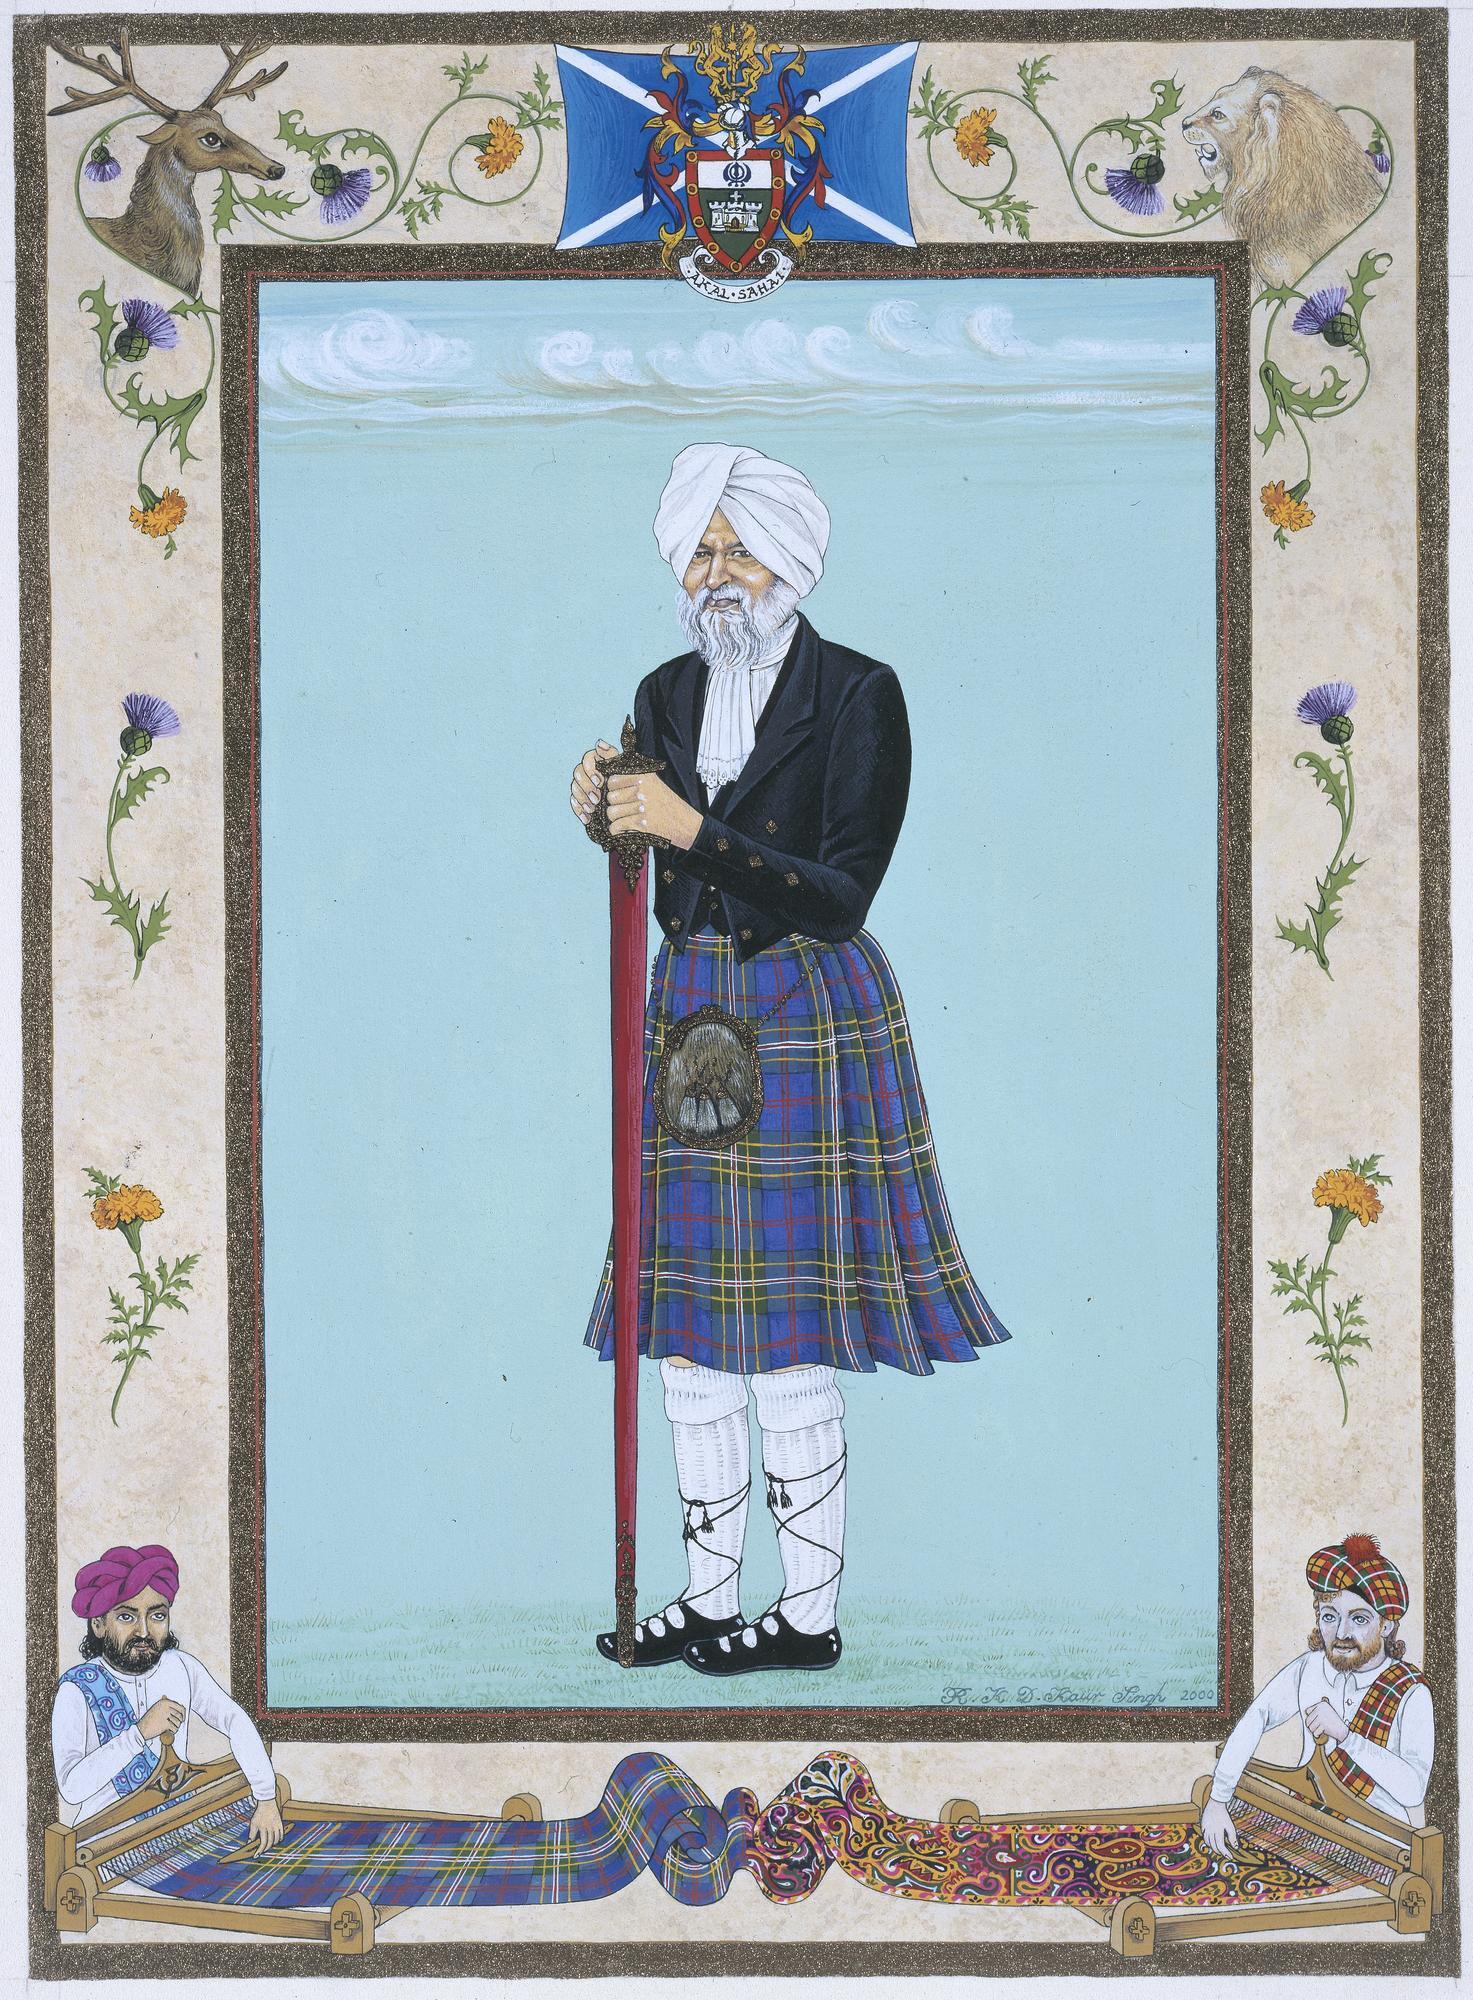 © The Singh Twins: www.singhtwins.co.uk; Image © National Museums Scotland